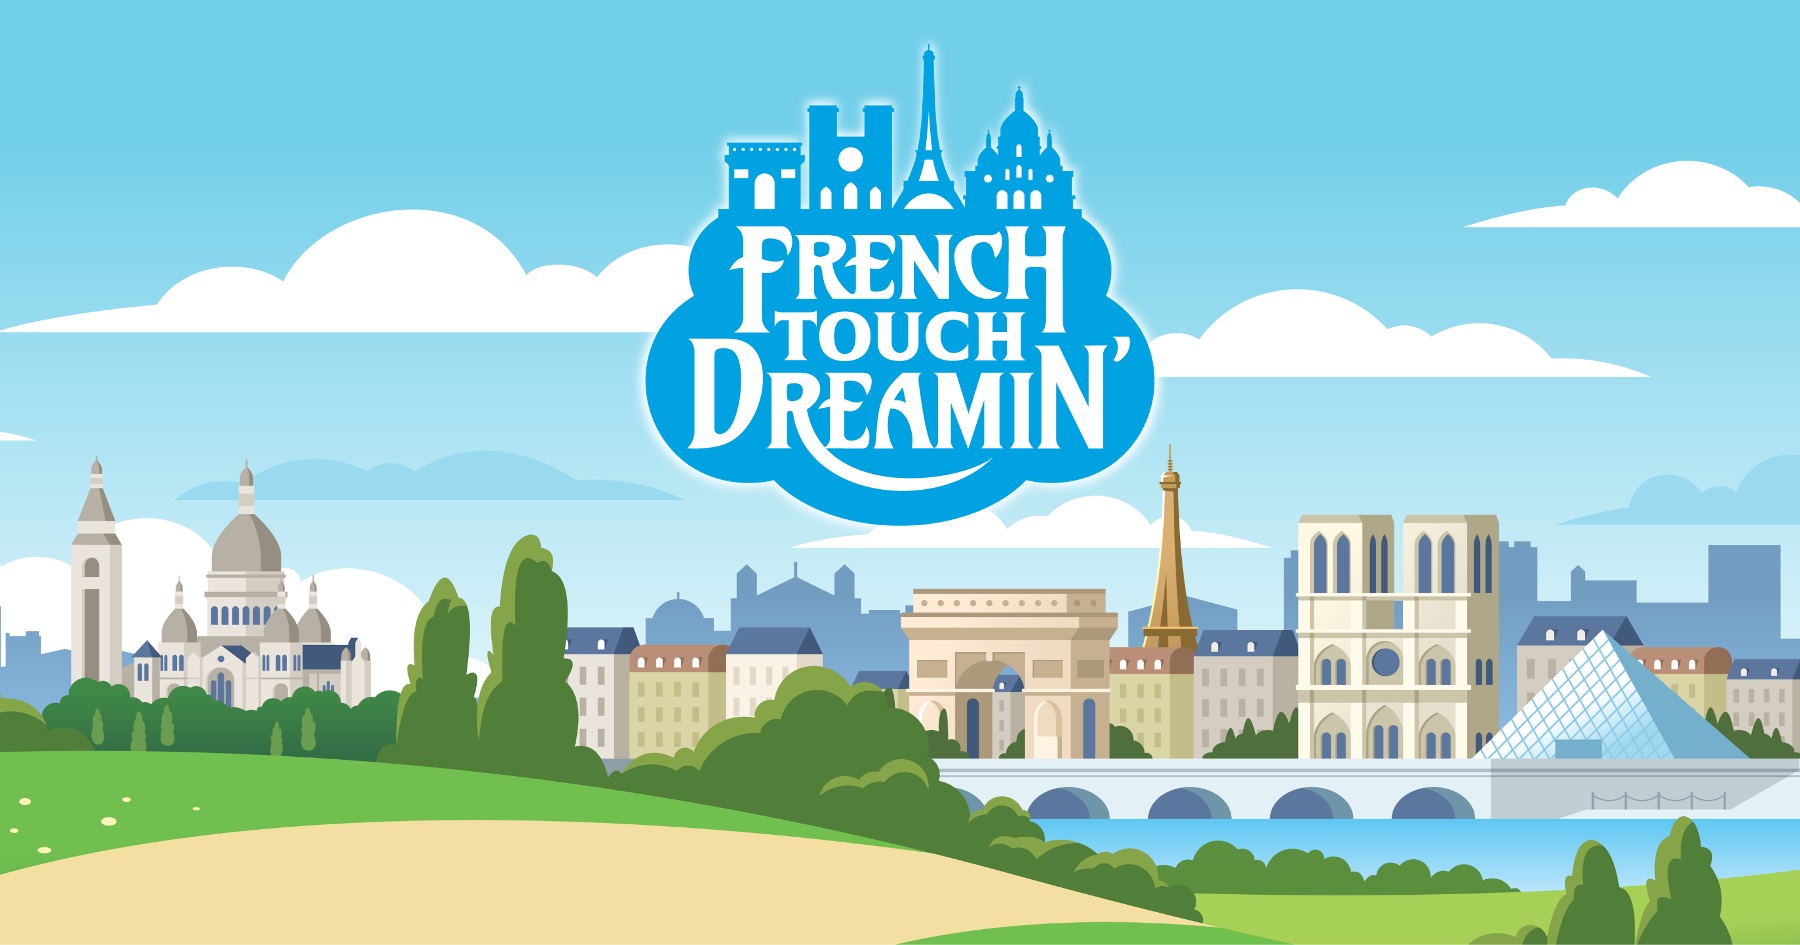 French Touch Dreamin' conference logo.